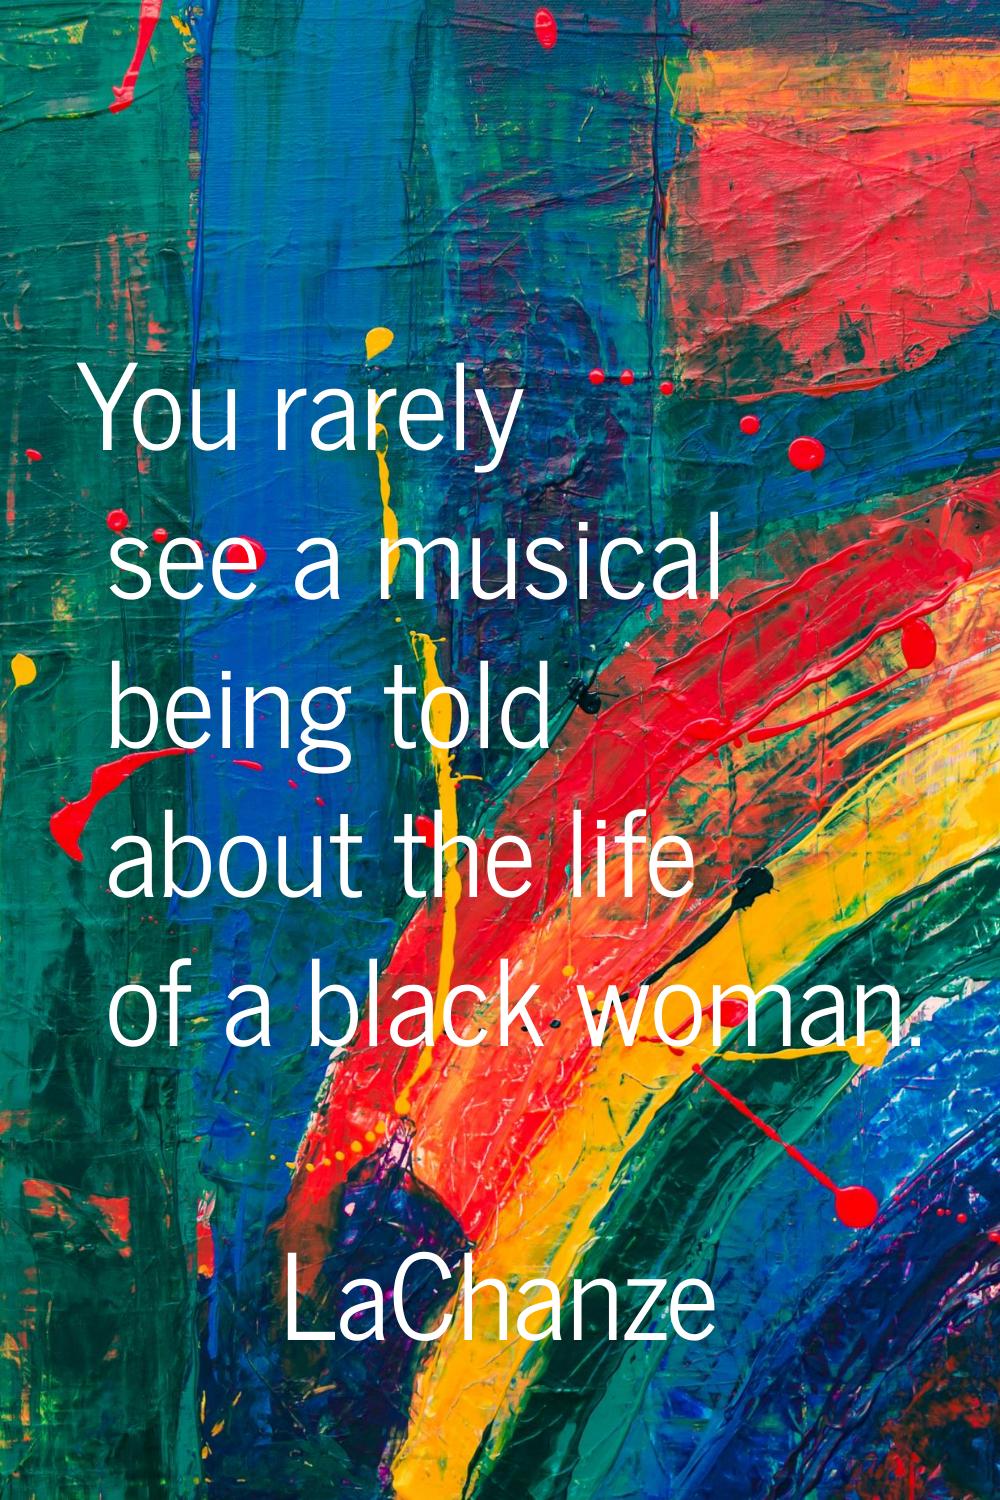 You rarely see a musical being told about the life of a black woman.